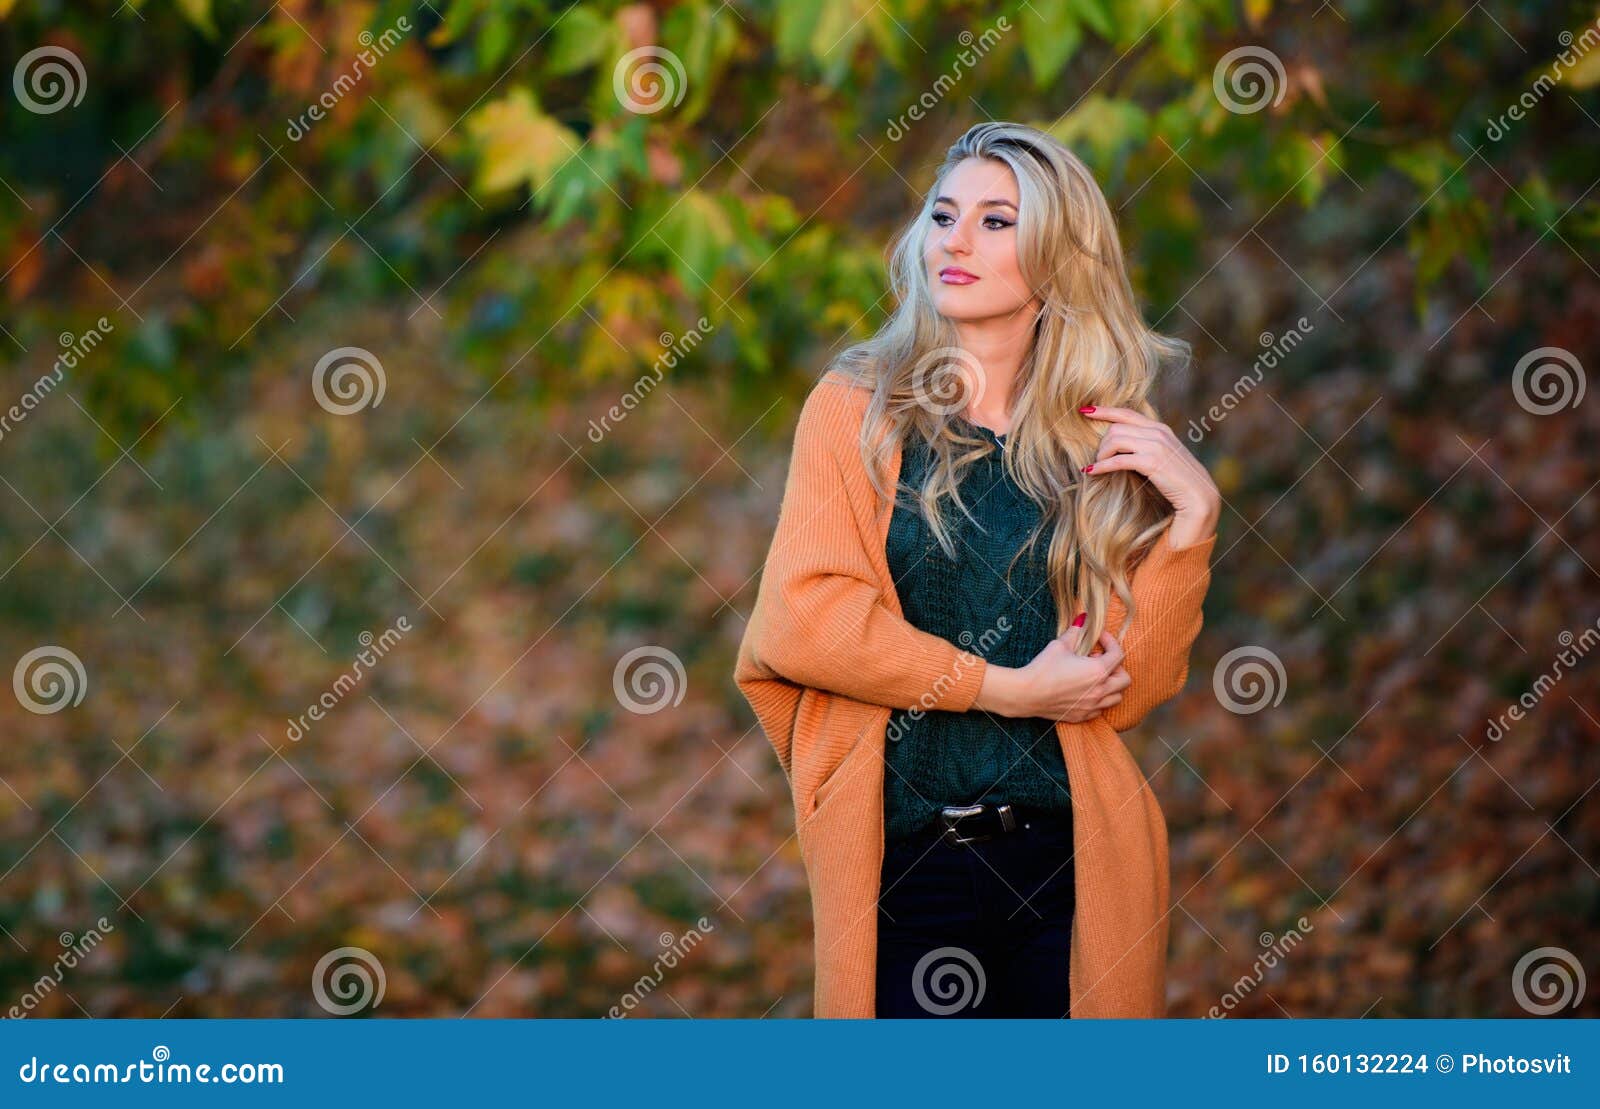 Comfortable Outfit. Girl Adorable Blonde Posing in Warm and Cozy Outfit ...